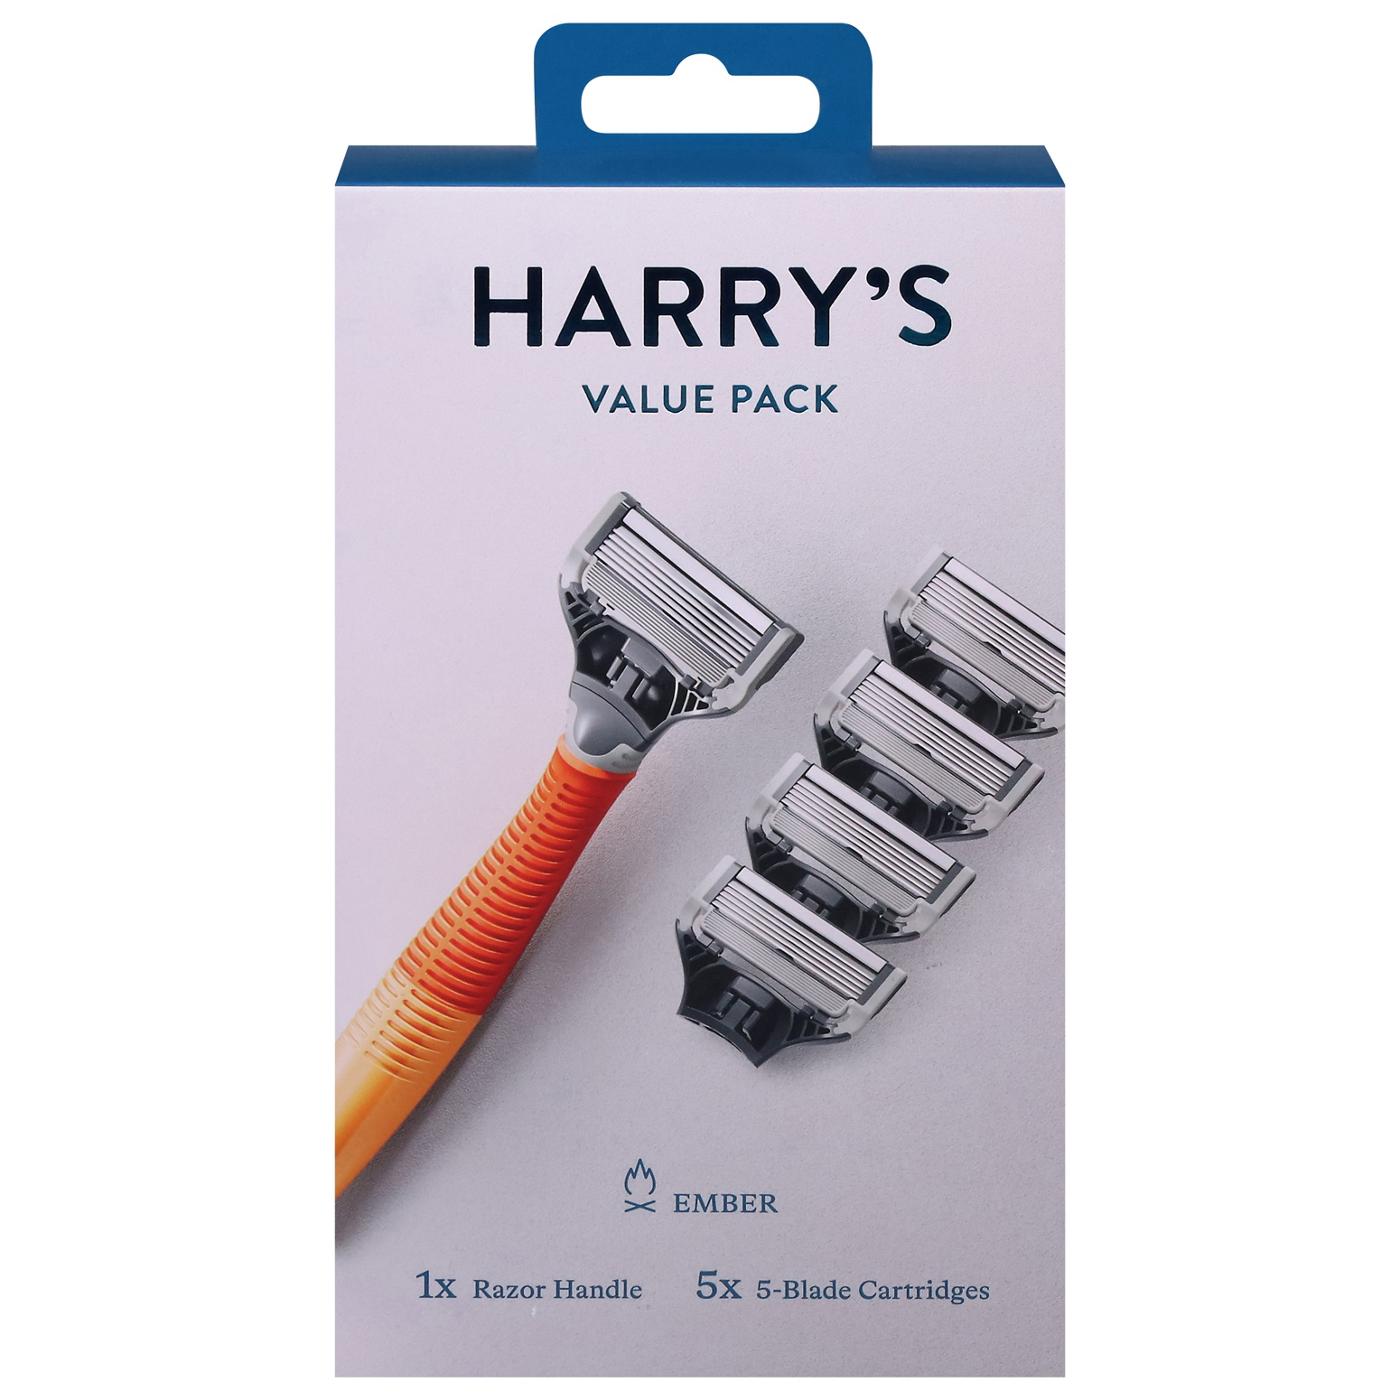 Harry's Value Pack Razor and Handle ; image 1 of 3